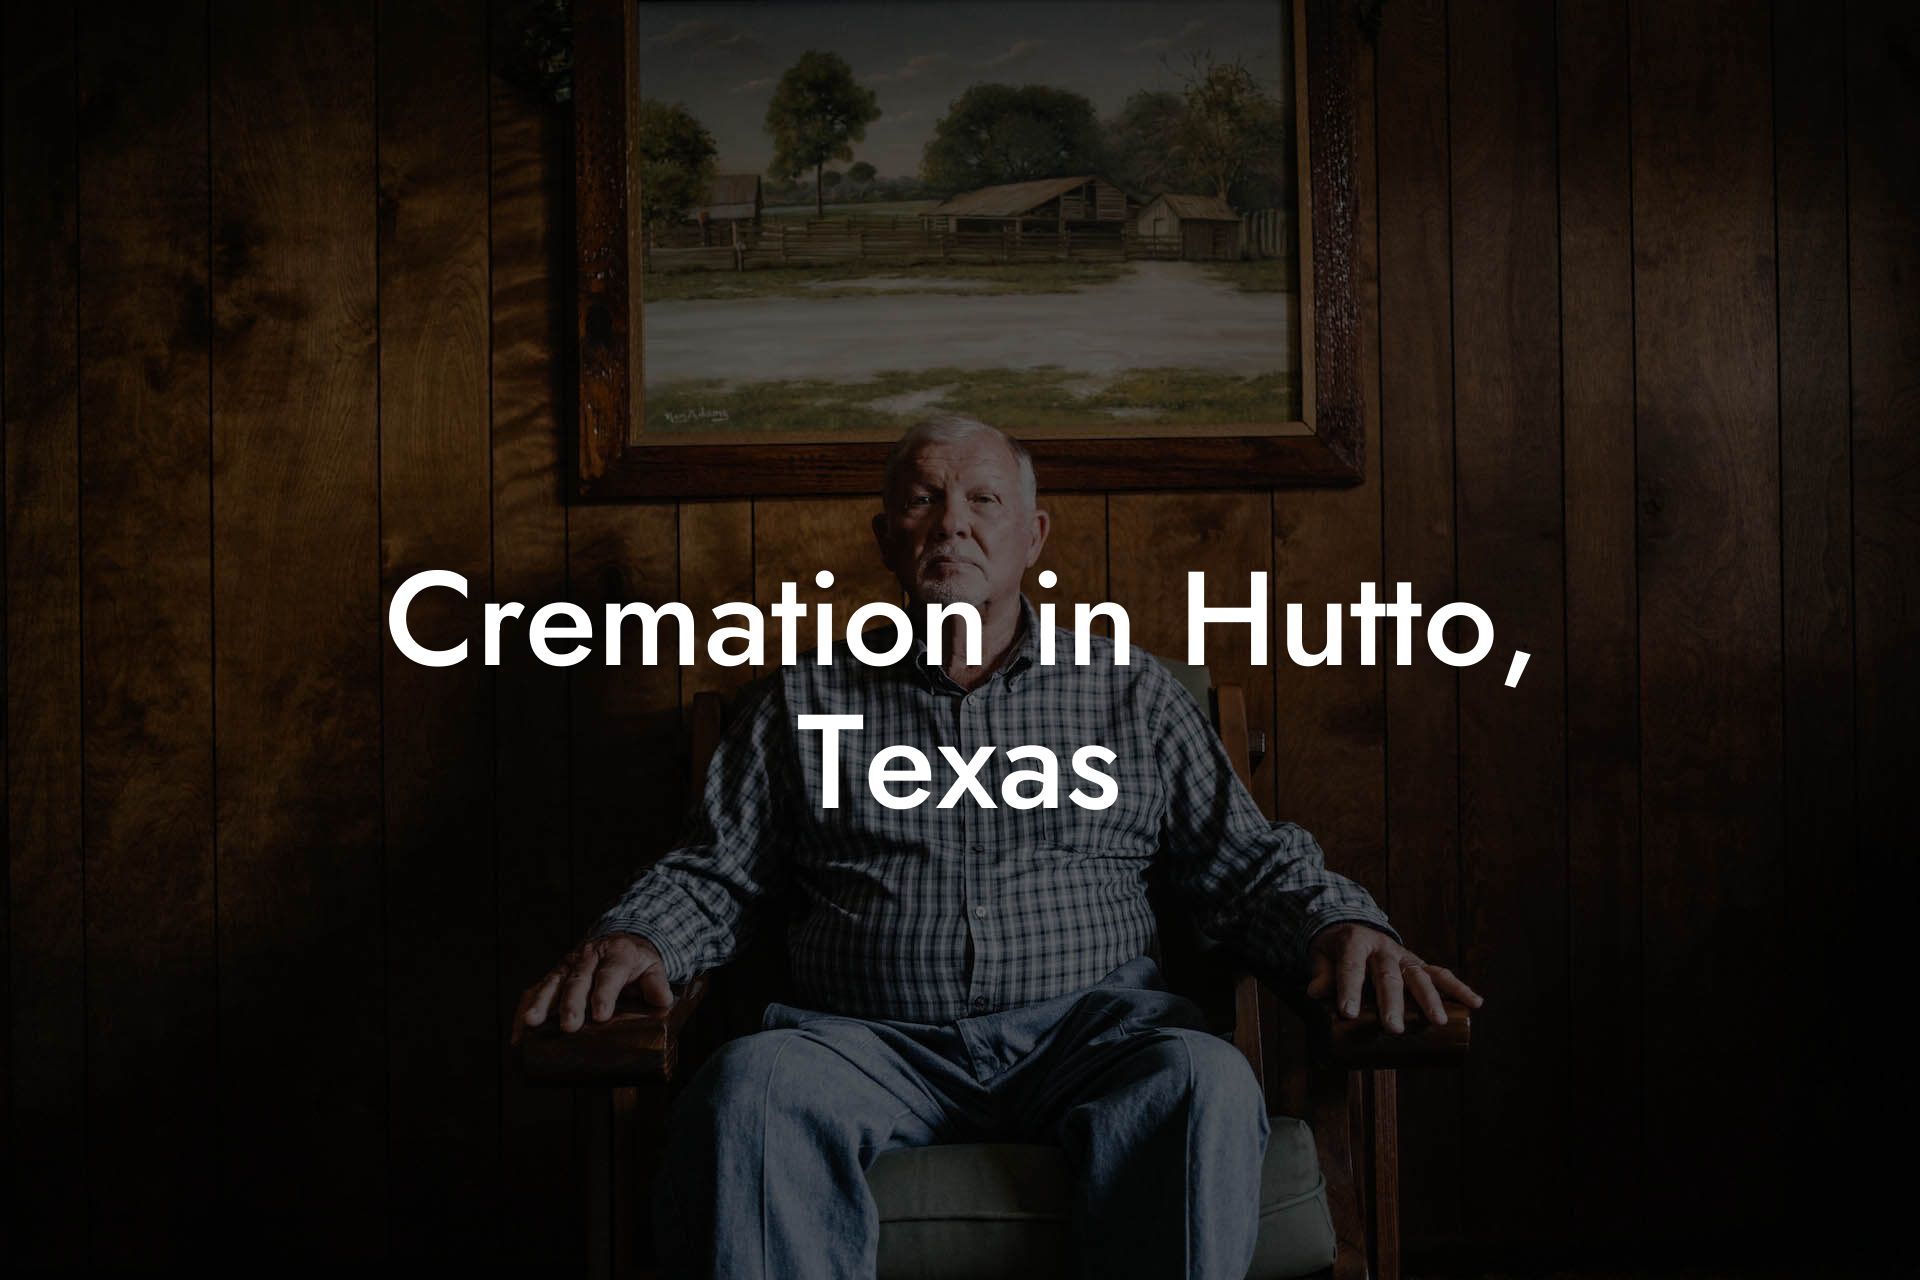 Cremation in Hutto, Texas